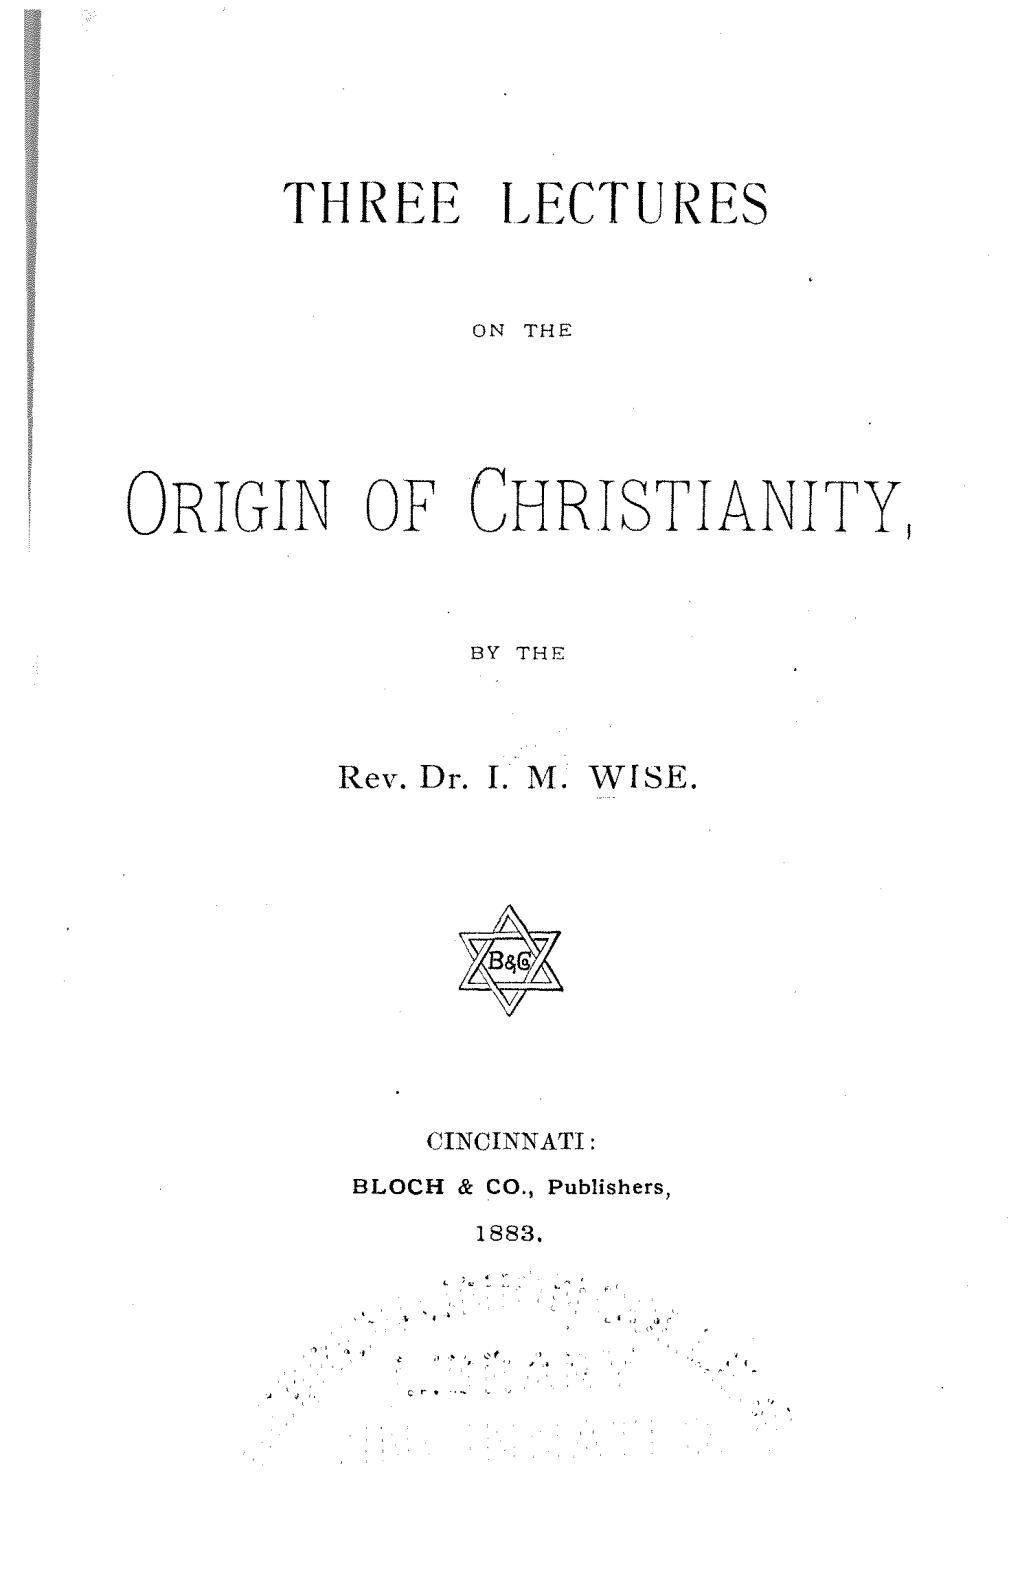 Three Lectures on the Origin of Christianity